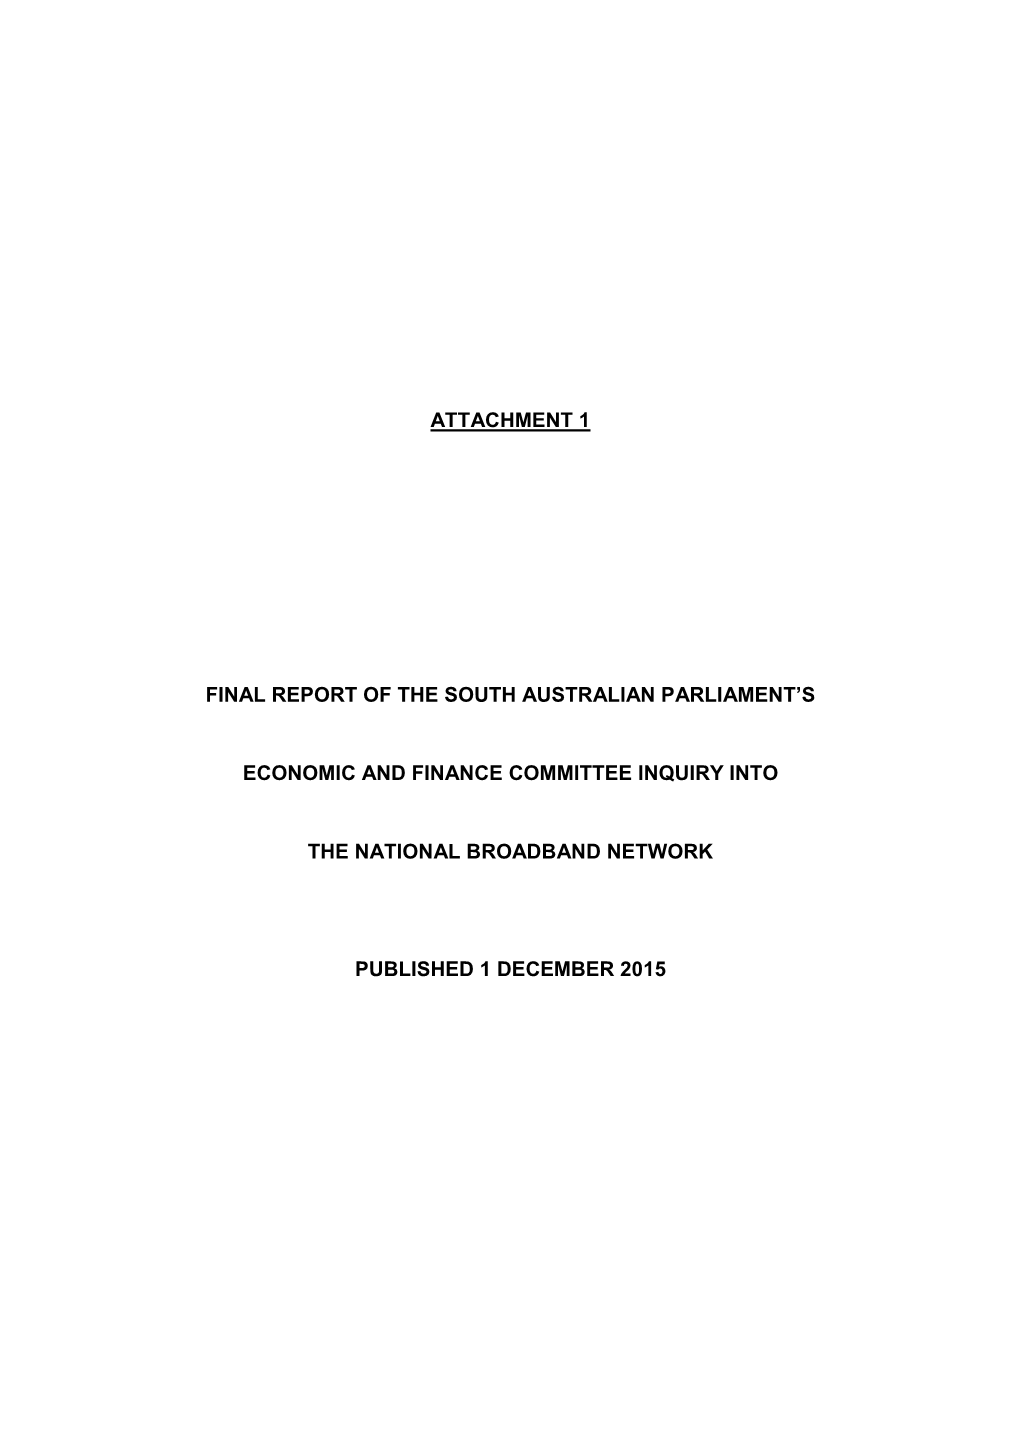 Attachment 1 Final Report of the South Australian